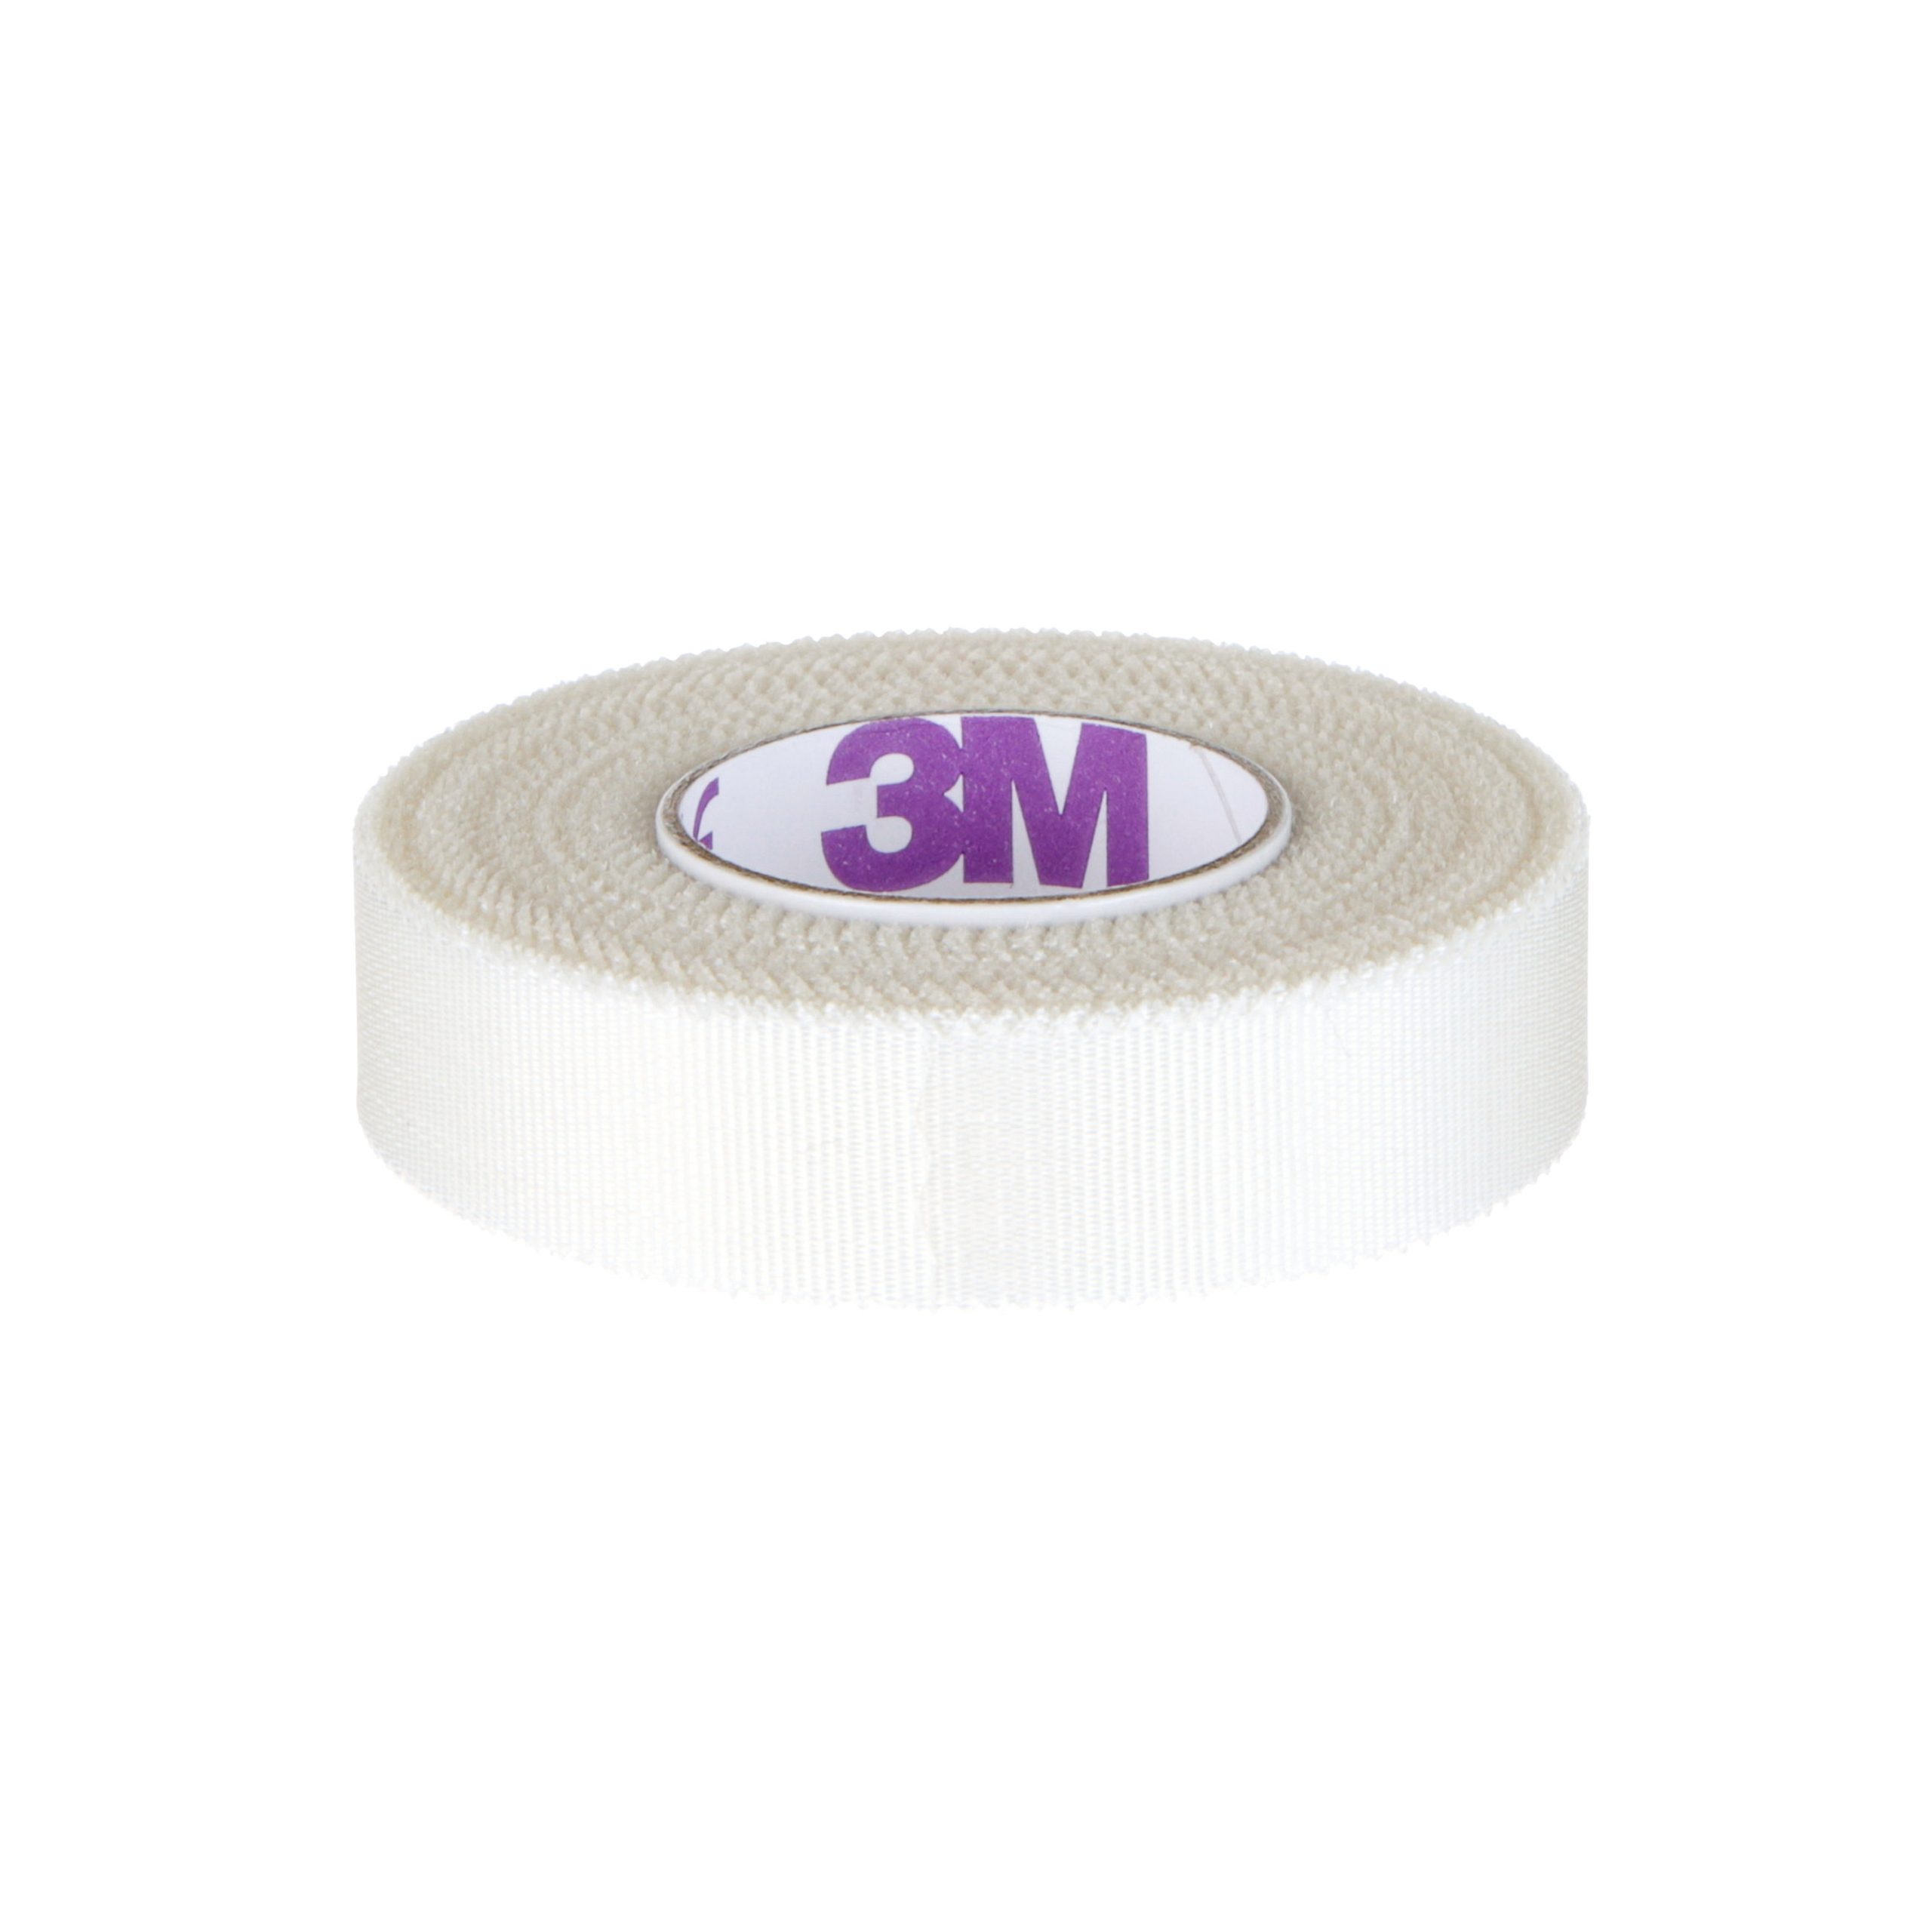  3M Healthcare Durapore Silk-Like Cloth Surgical Tape 2 x 10  yds, Hypoallergenic Adhesive, Water Resistant, Latex-Free (Roll of 1 Each)  : Health & Household